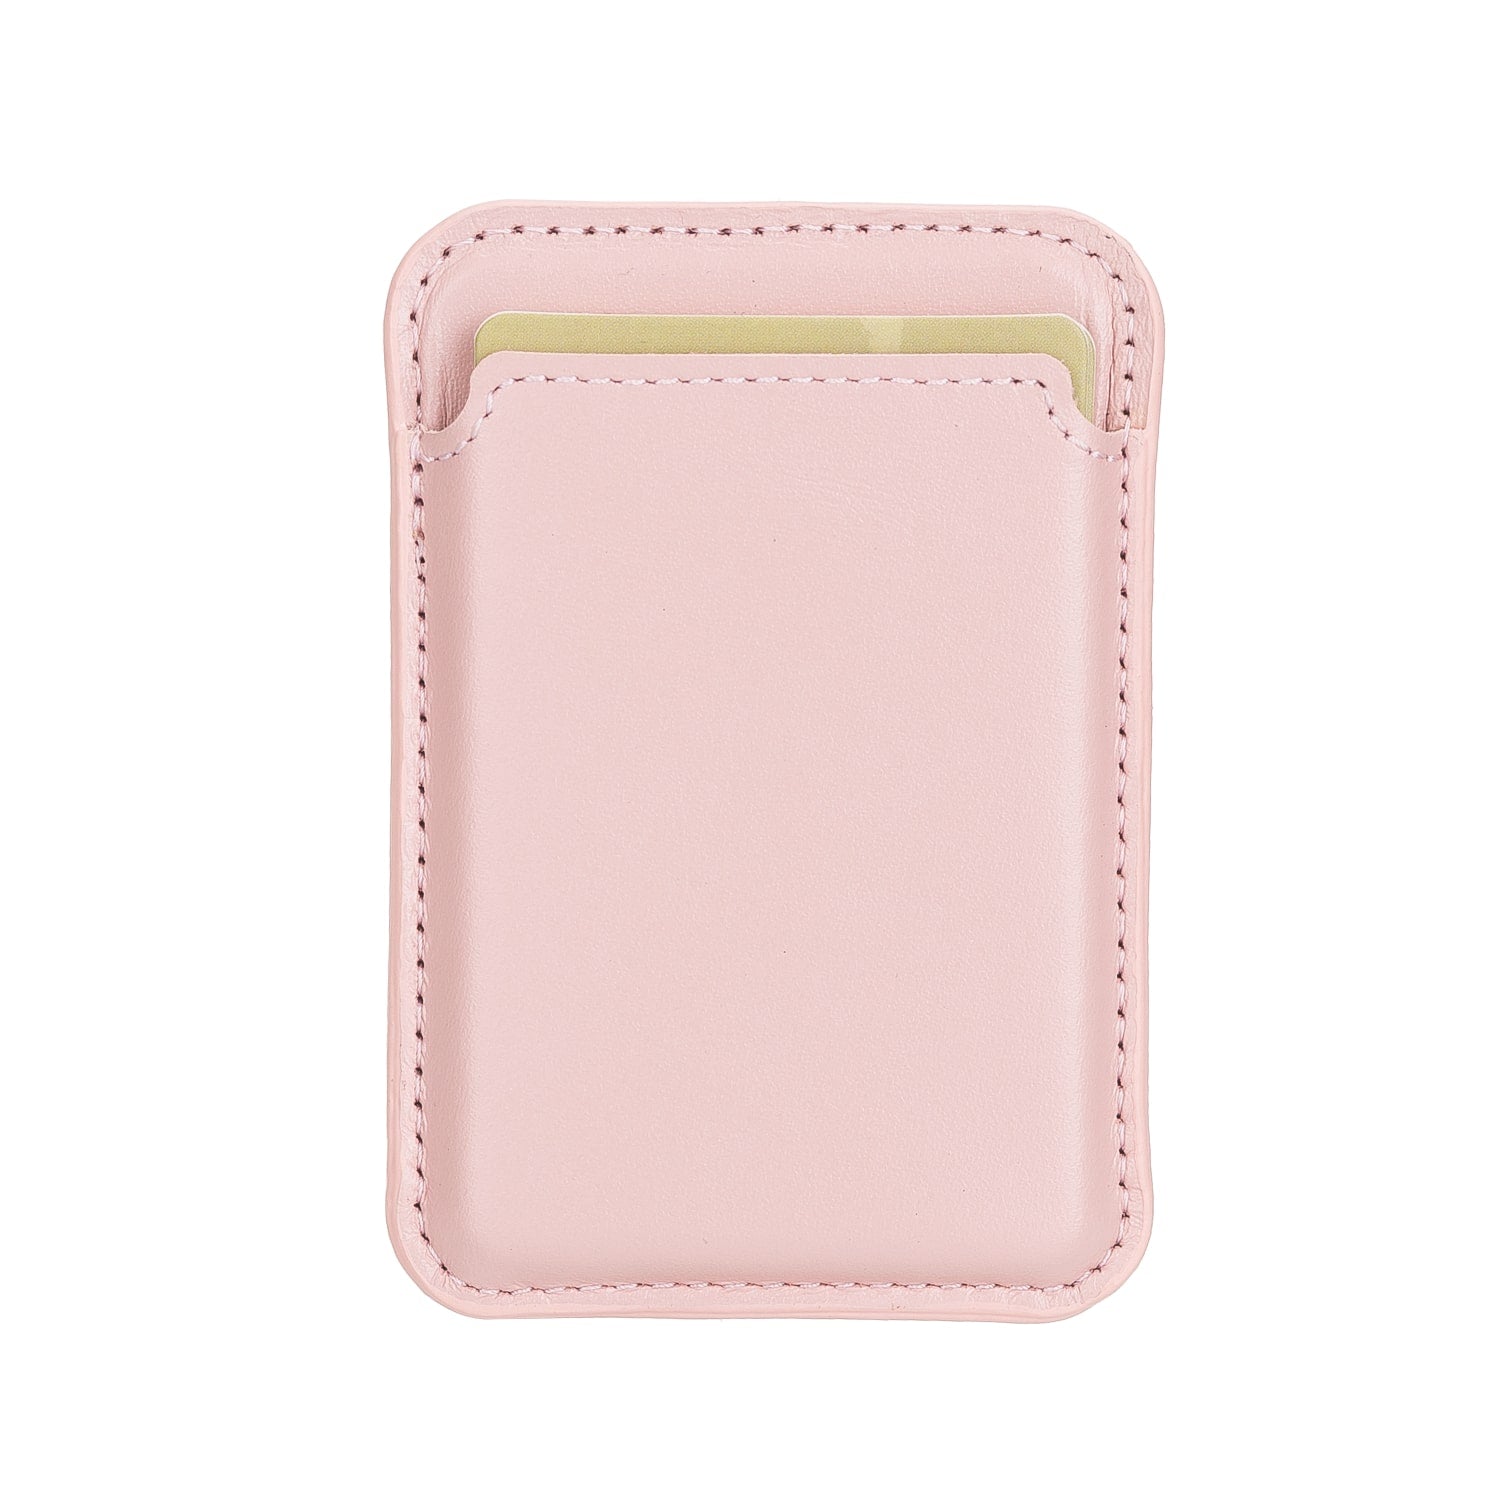 Pink Leather Apple MagSafe Card Holder Magnetic Wallet for iPhone - Bomonti - 2